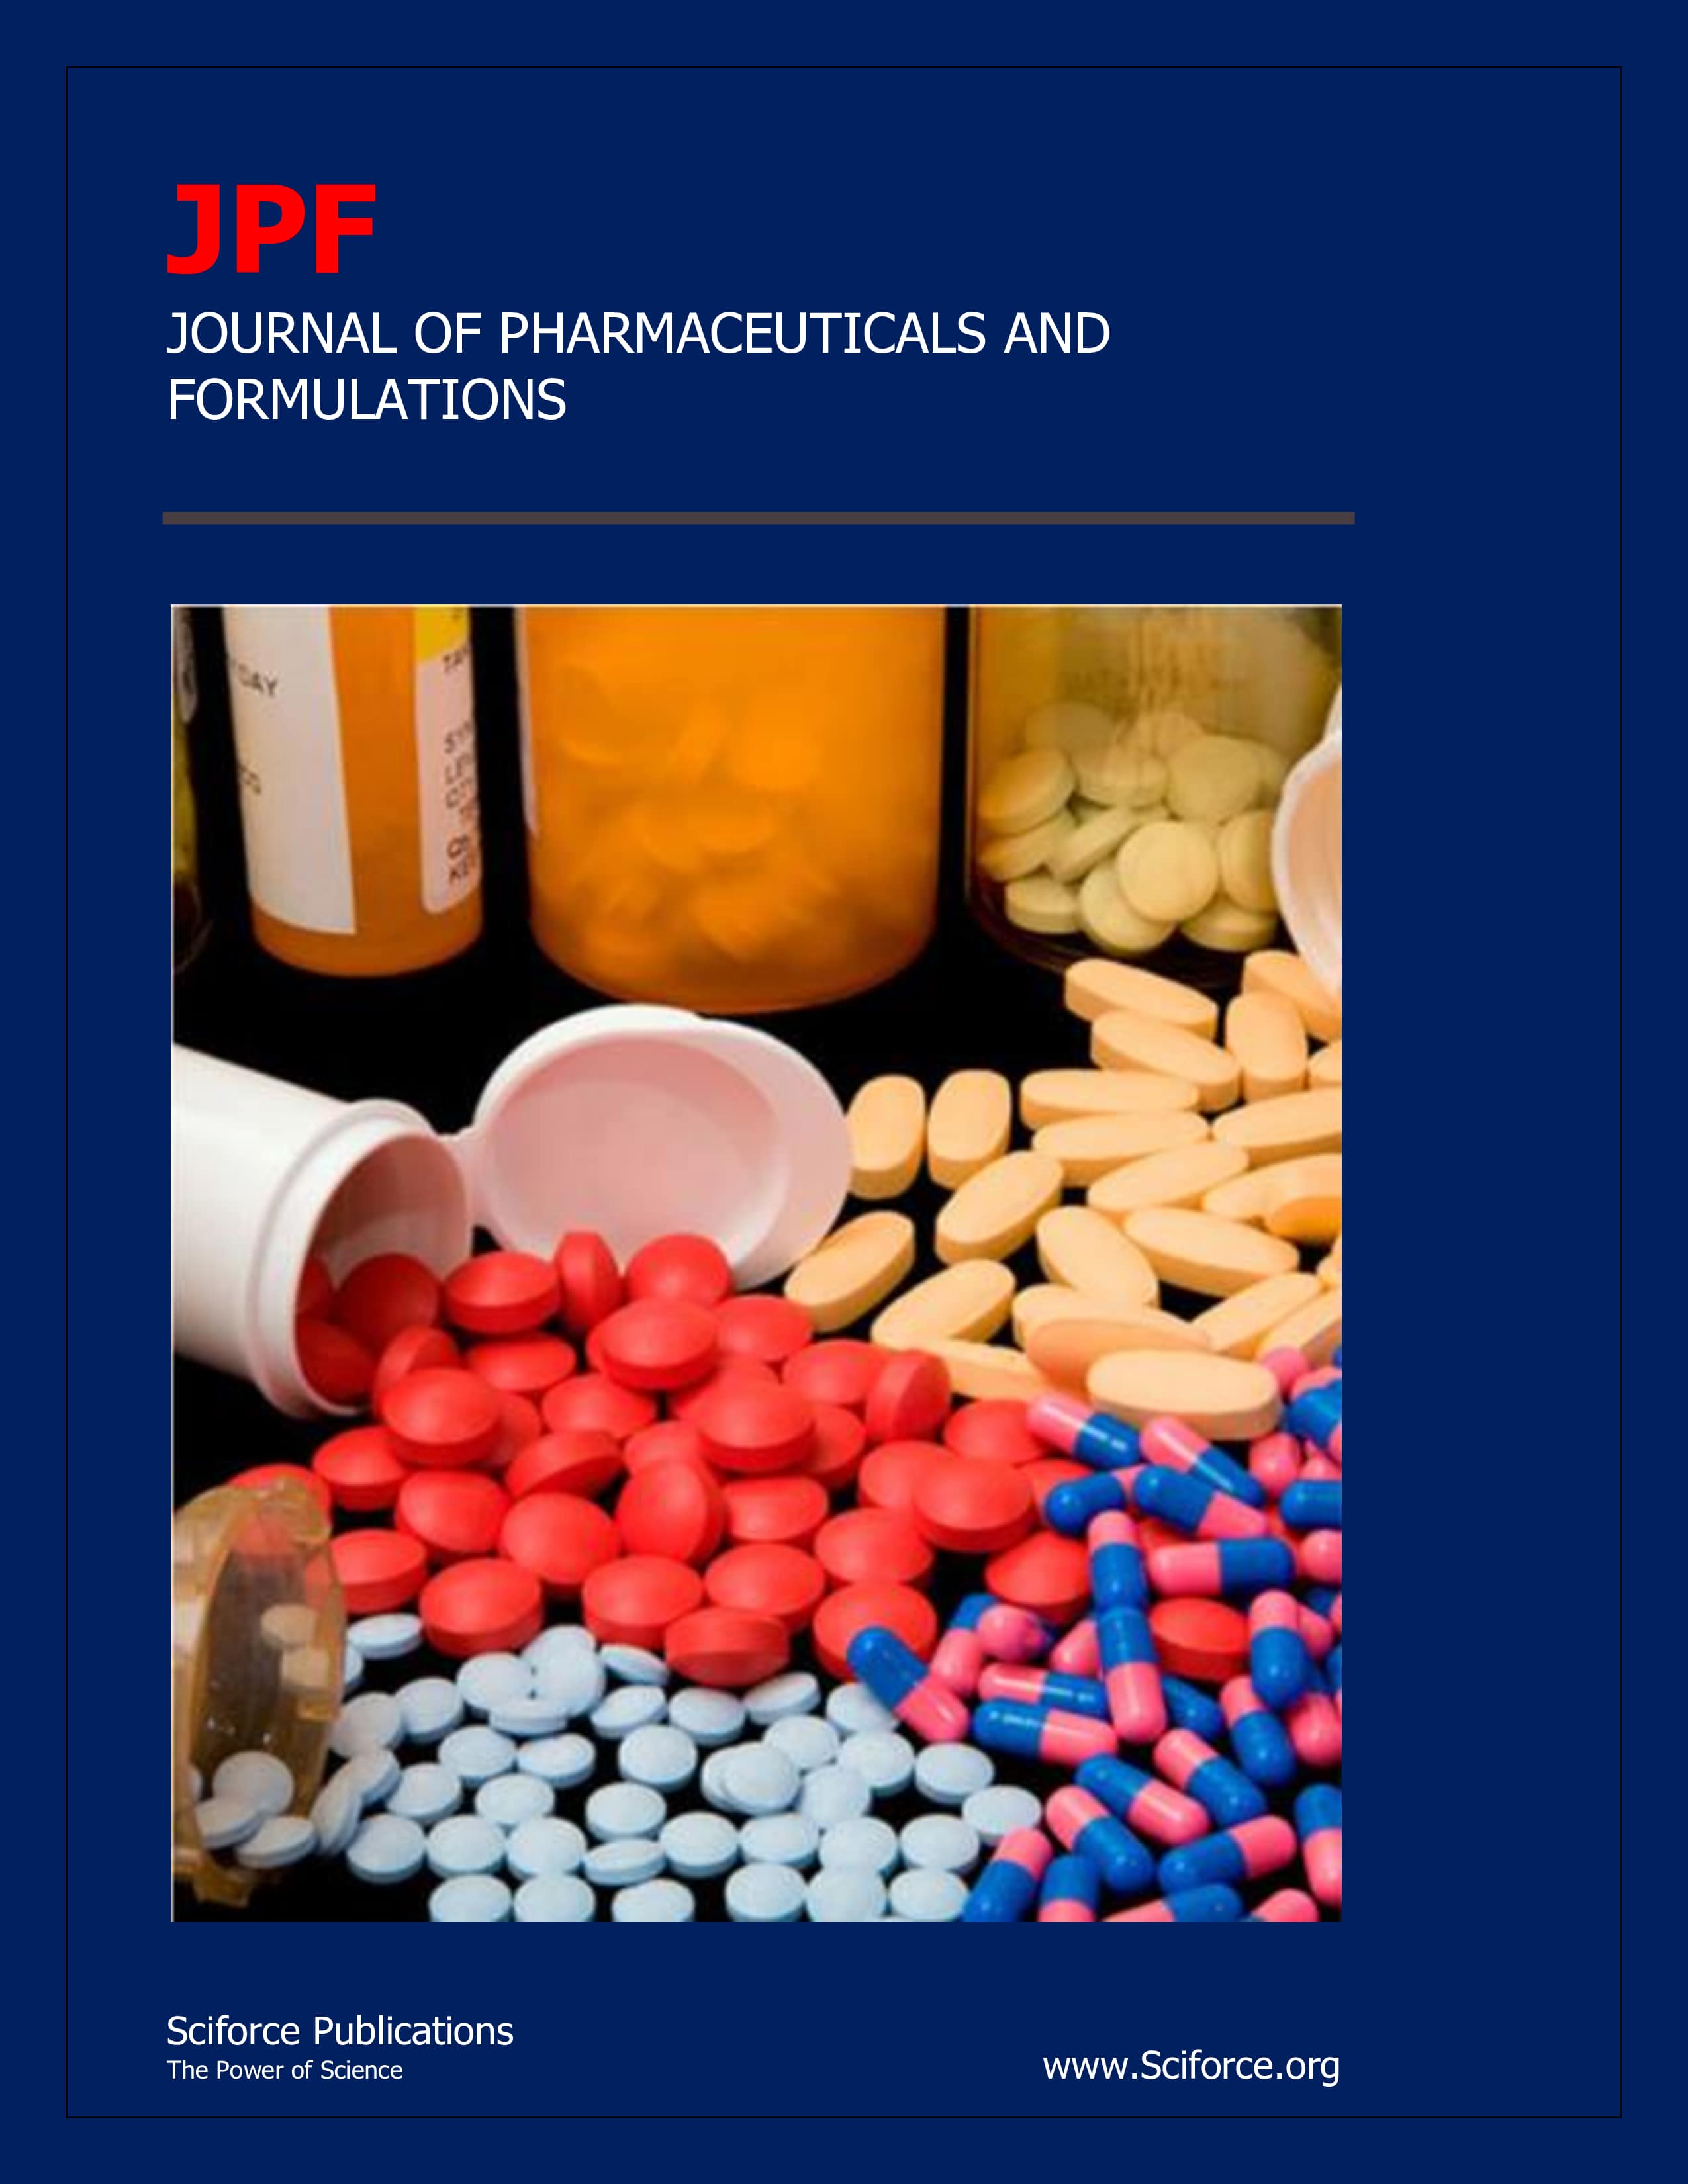 Journal of Pharmaceuticals and Formulations